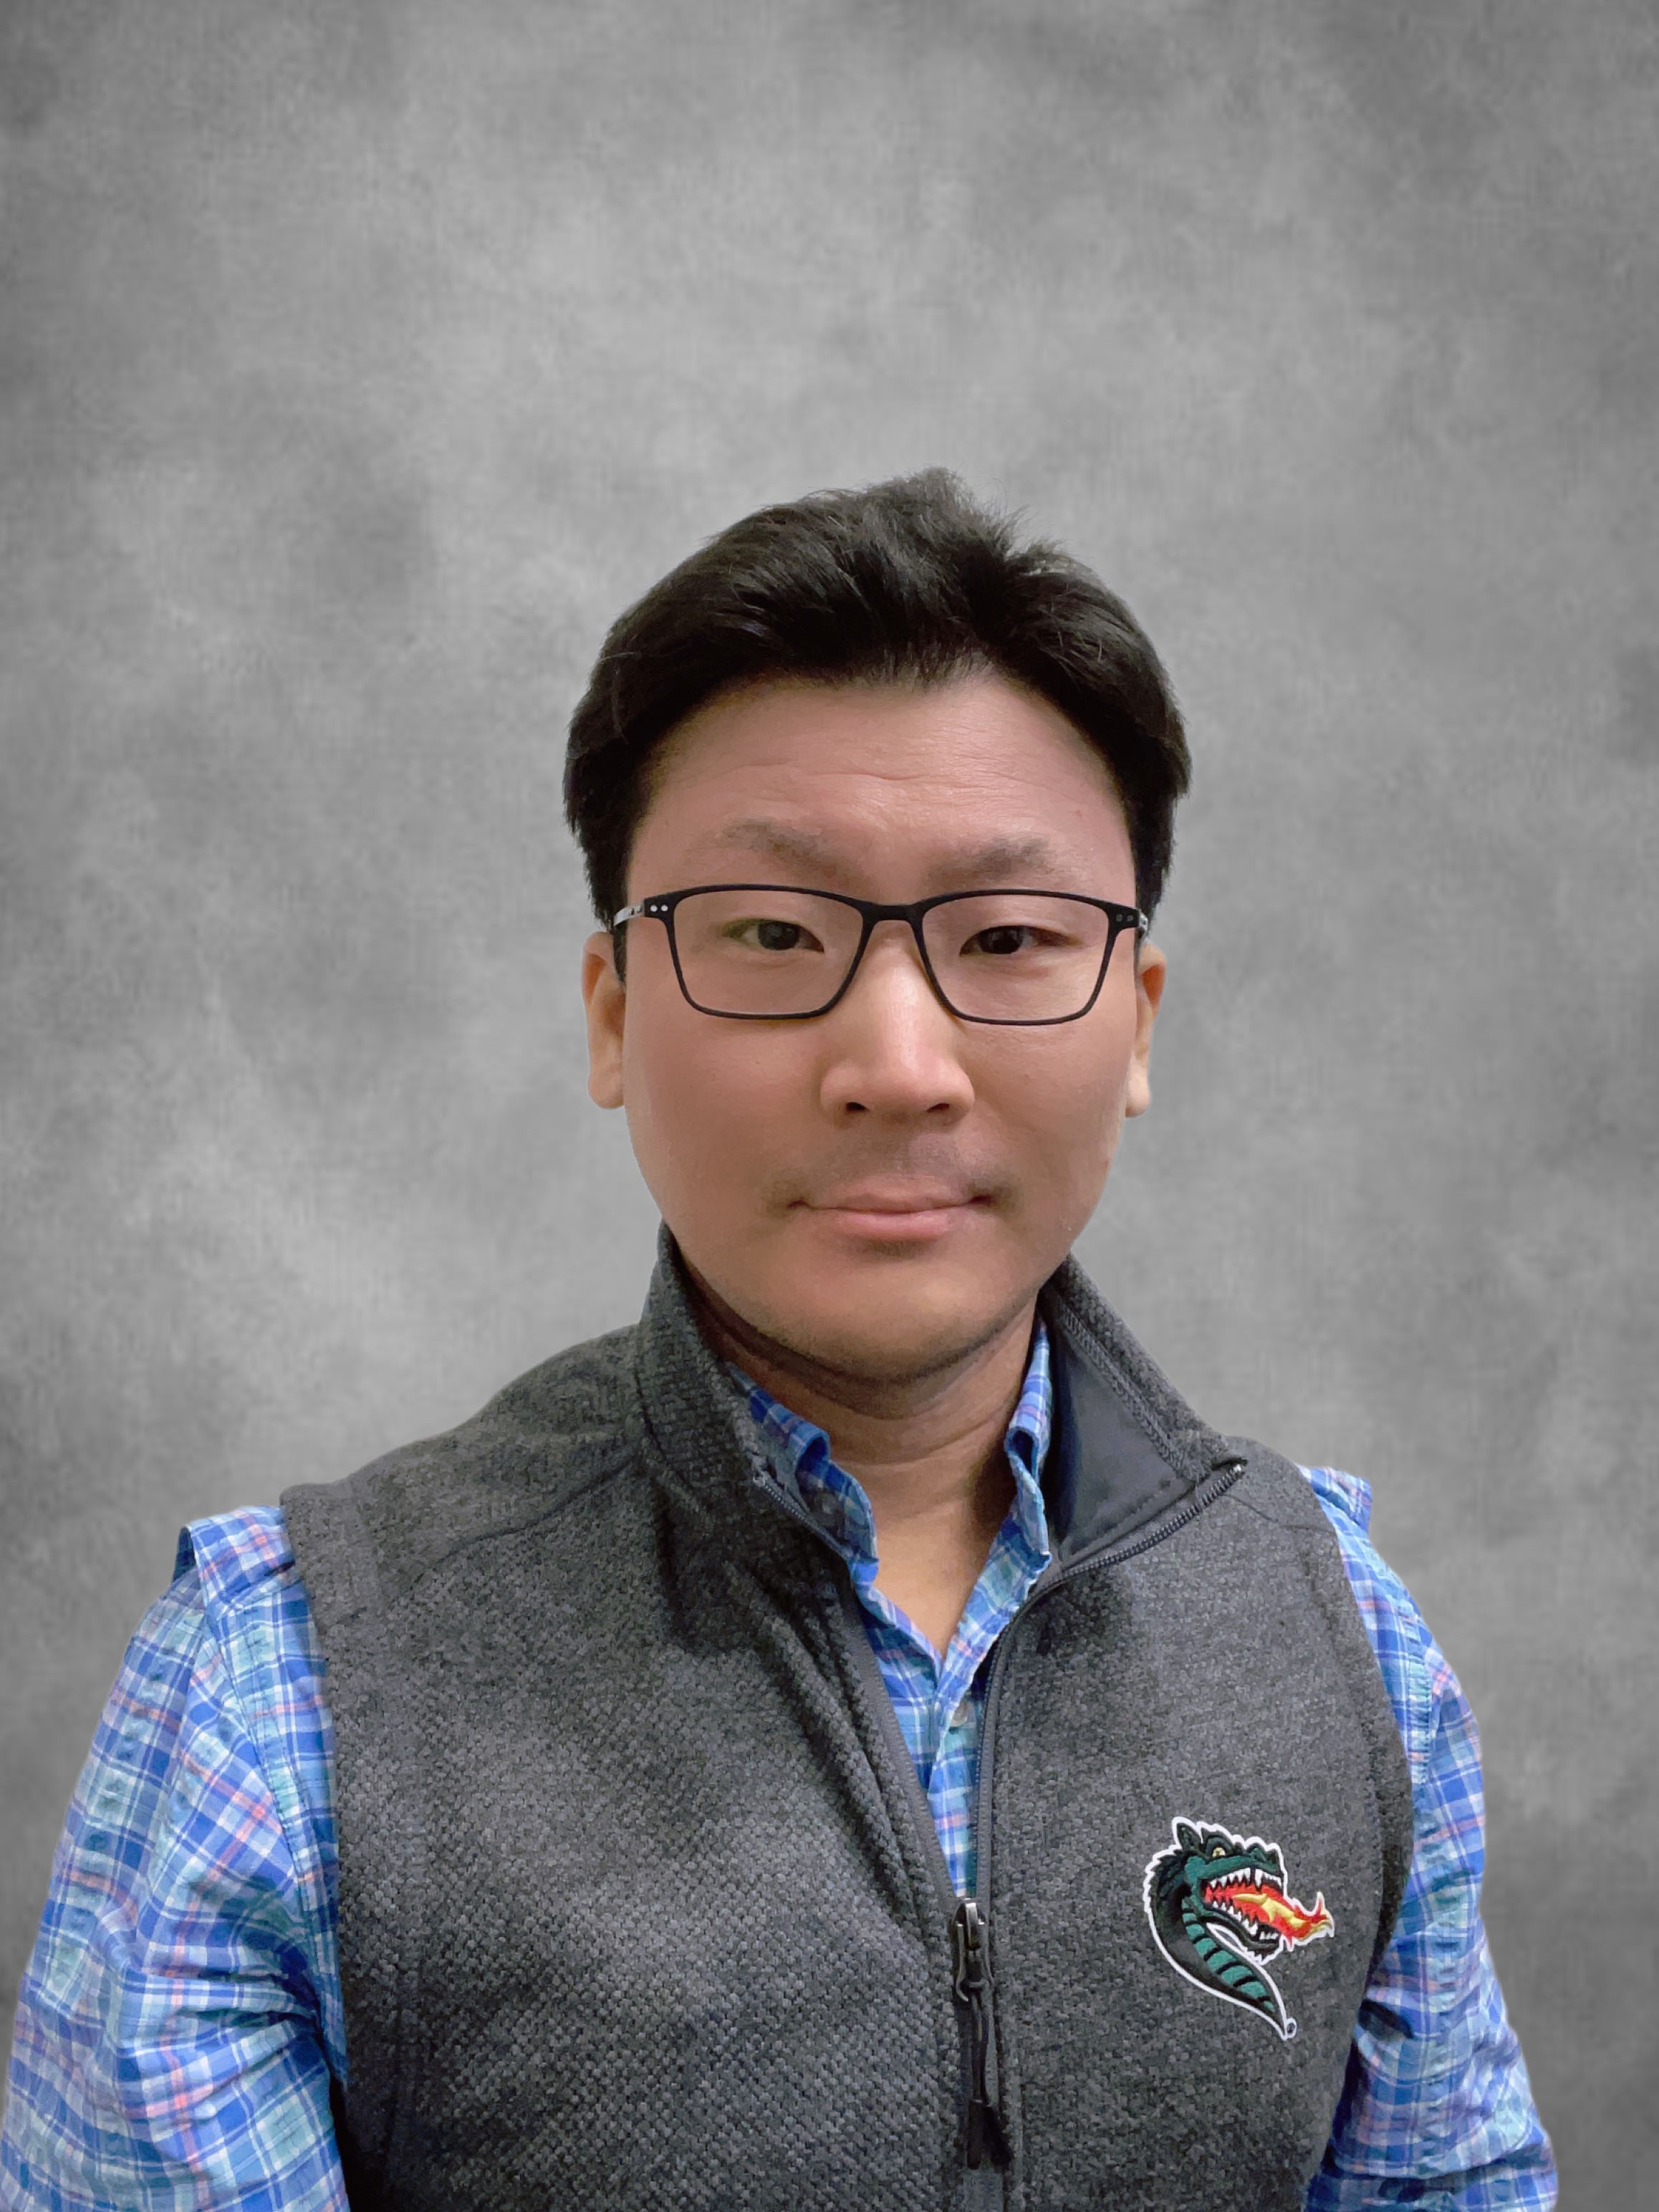 Study lead author Yusen Zhai is pictured. Zhai is assistant professor of counseling and director of the community counseling clinic at the University of Alabama at Birmingham.